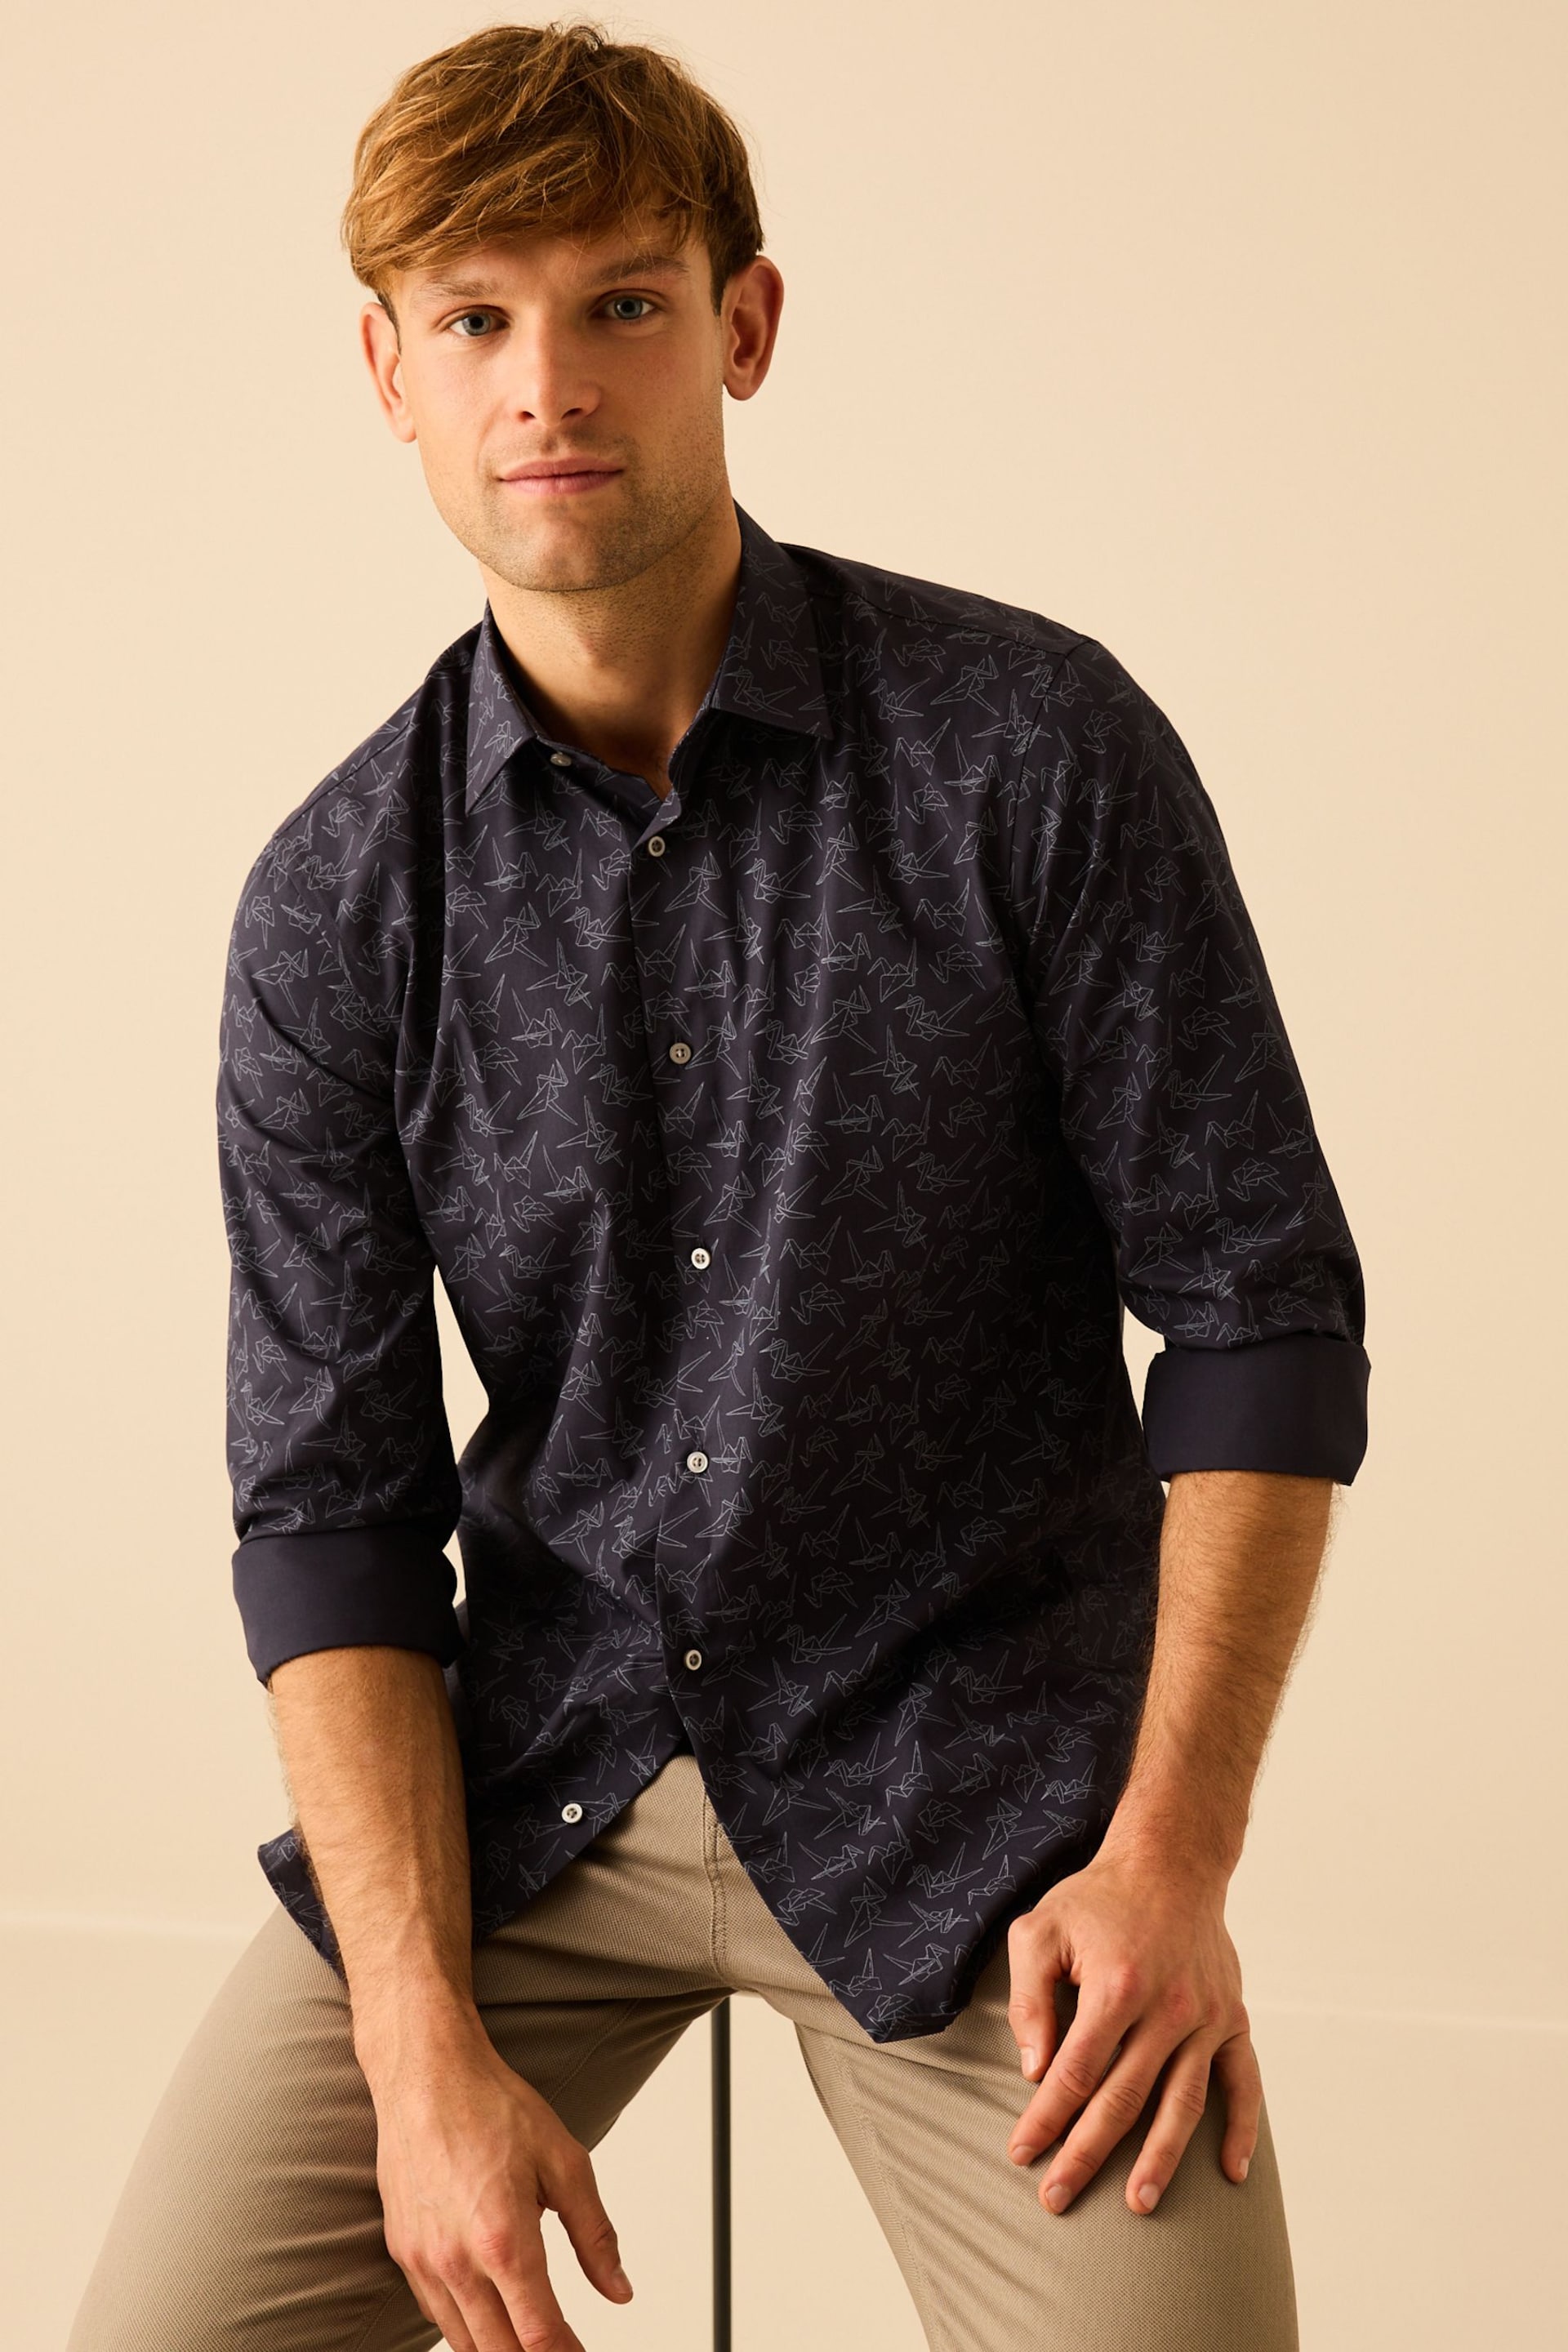 Navy Blue Origami Bird Printed Trimmed Shirt - Image 4 of 8